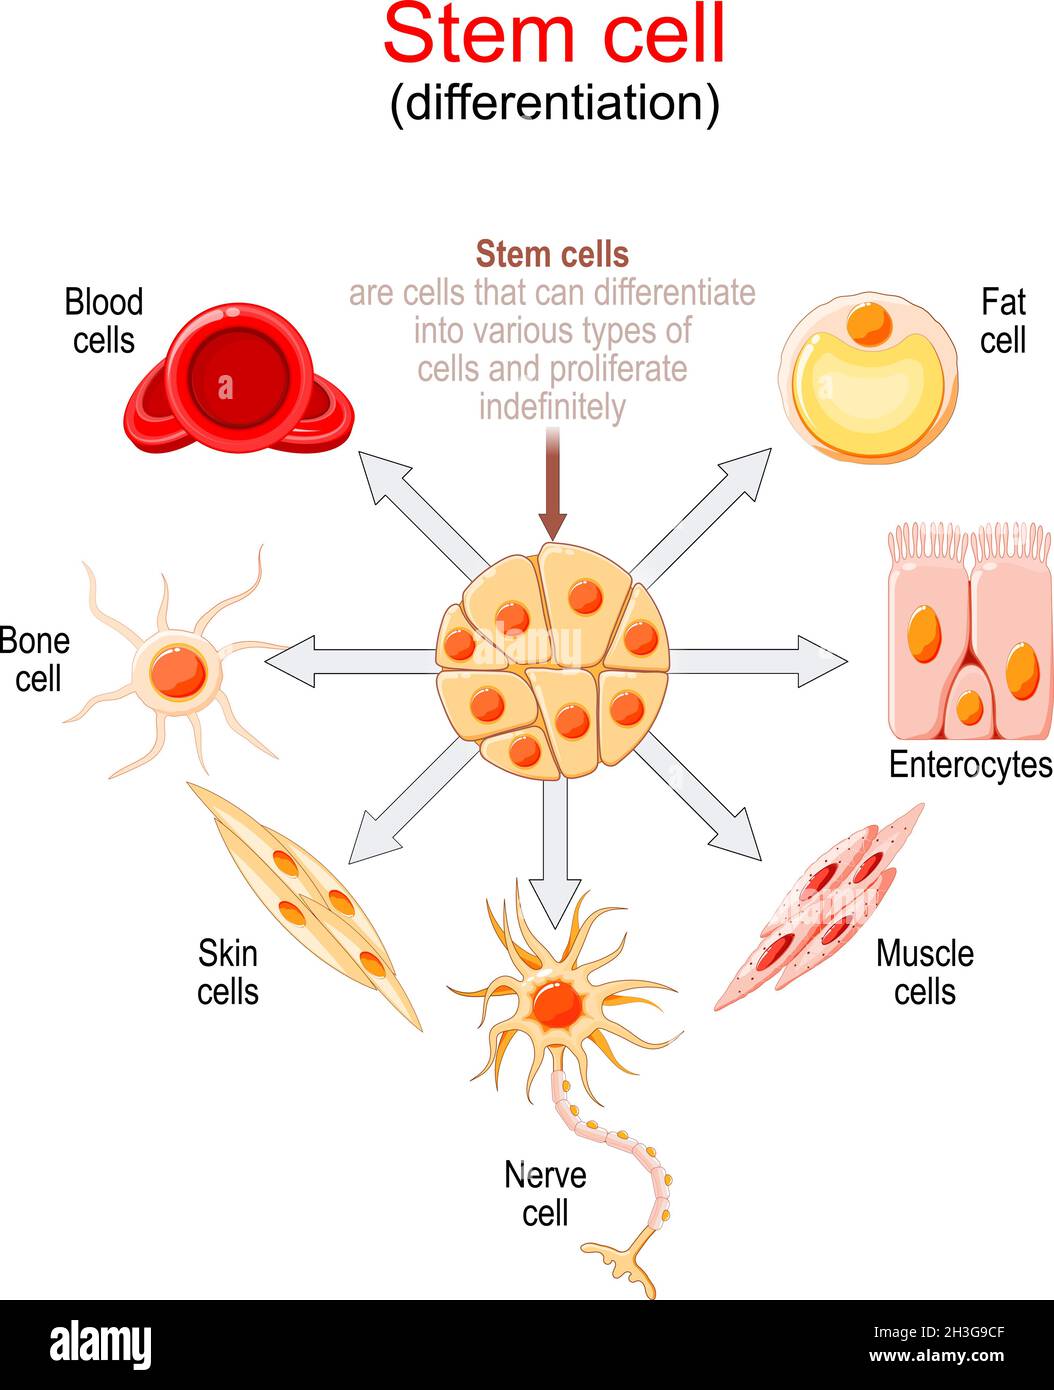 Stem cell differentiation. Stem cells are cells that can differentiate into various types of cells and proliferate indefinitely. Stock Vector